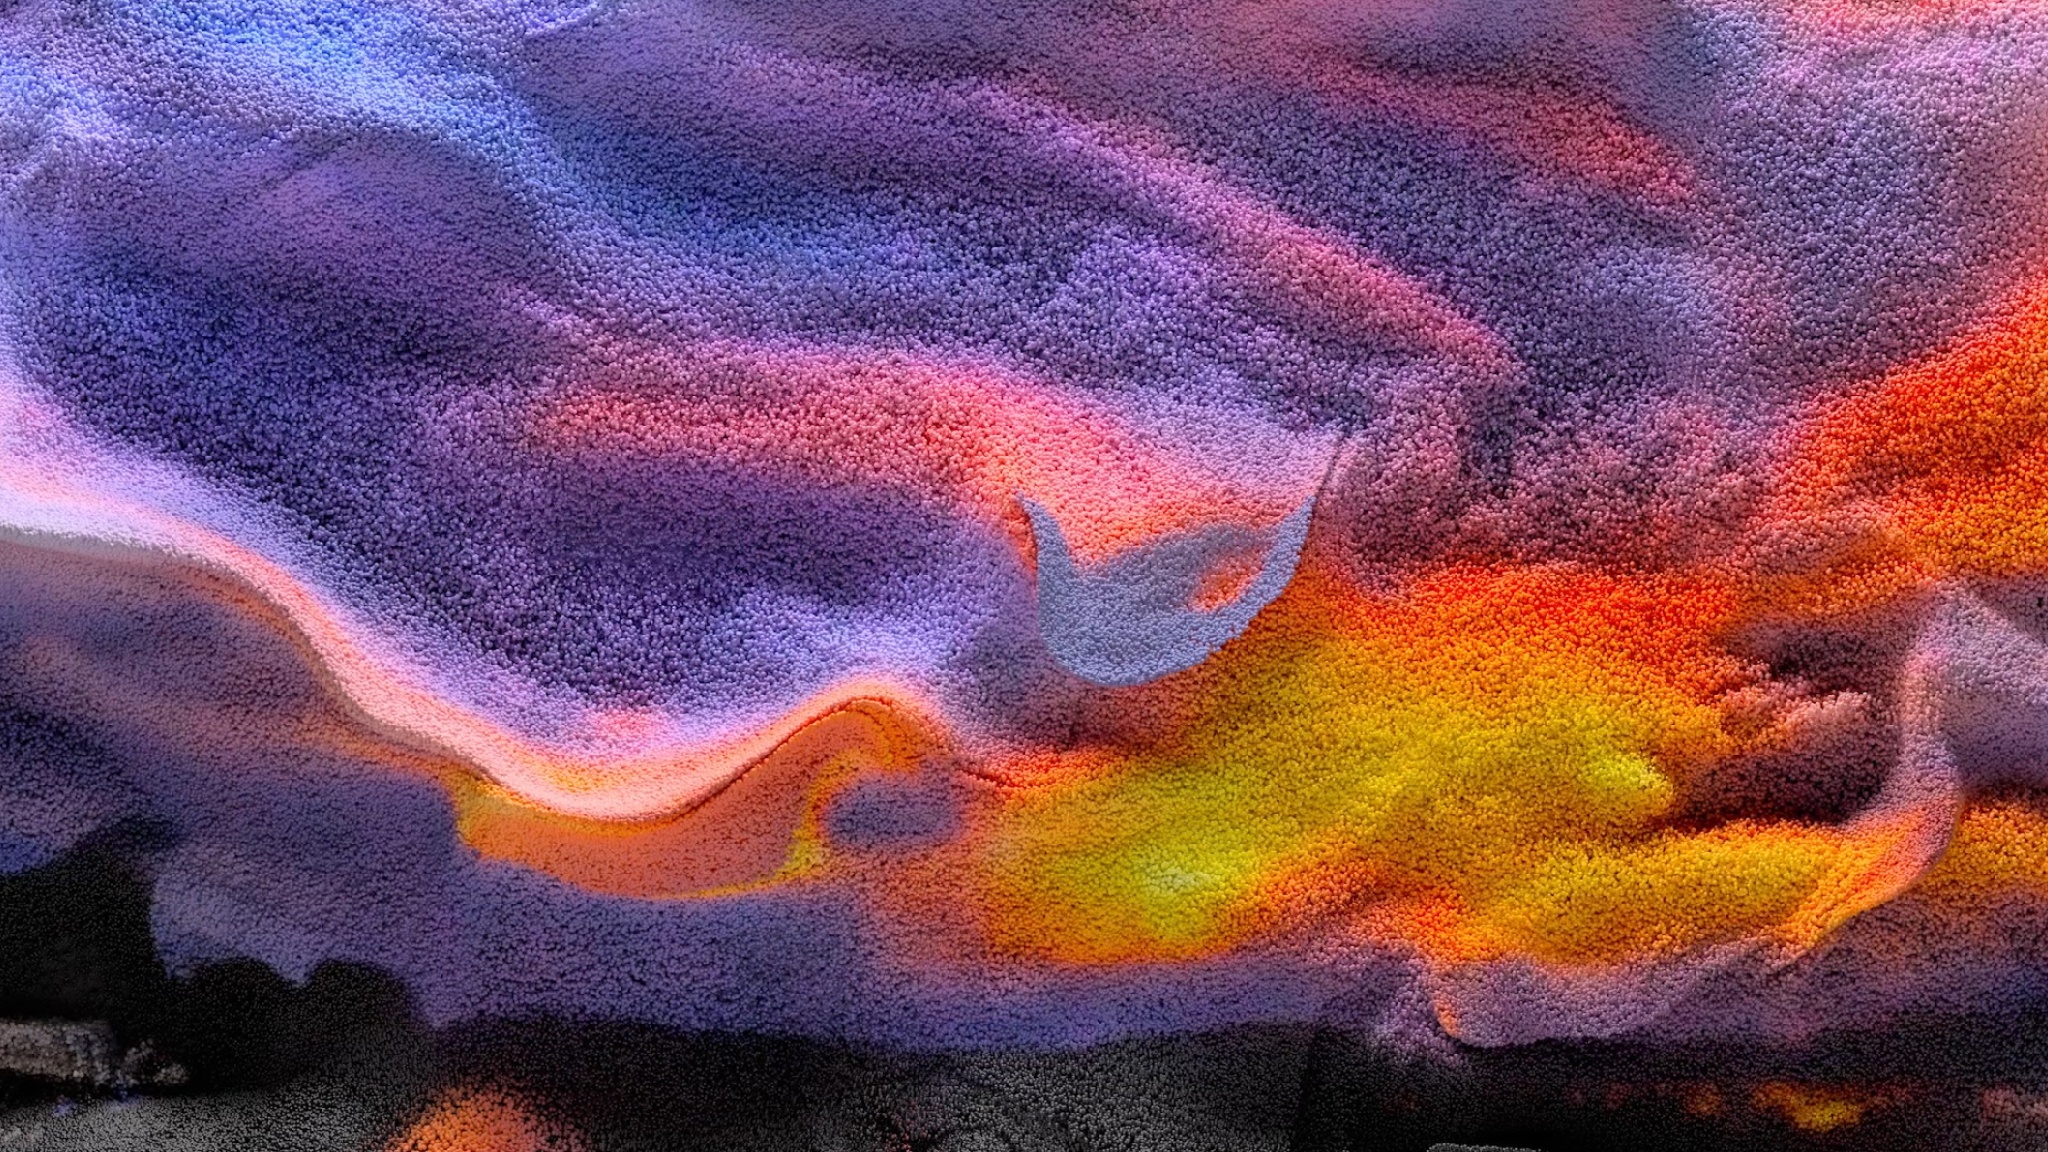 An abstract image that resembles a sandy landscape in the pink, purple, and orange hues of a desert sunset